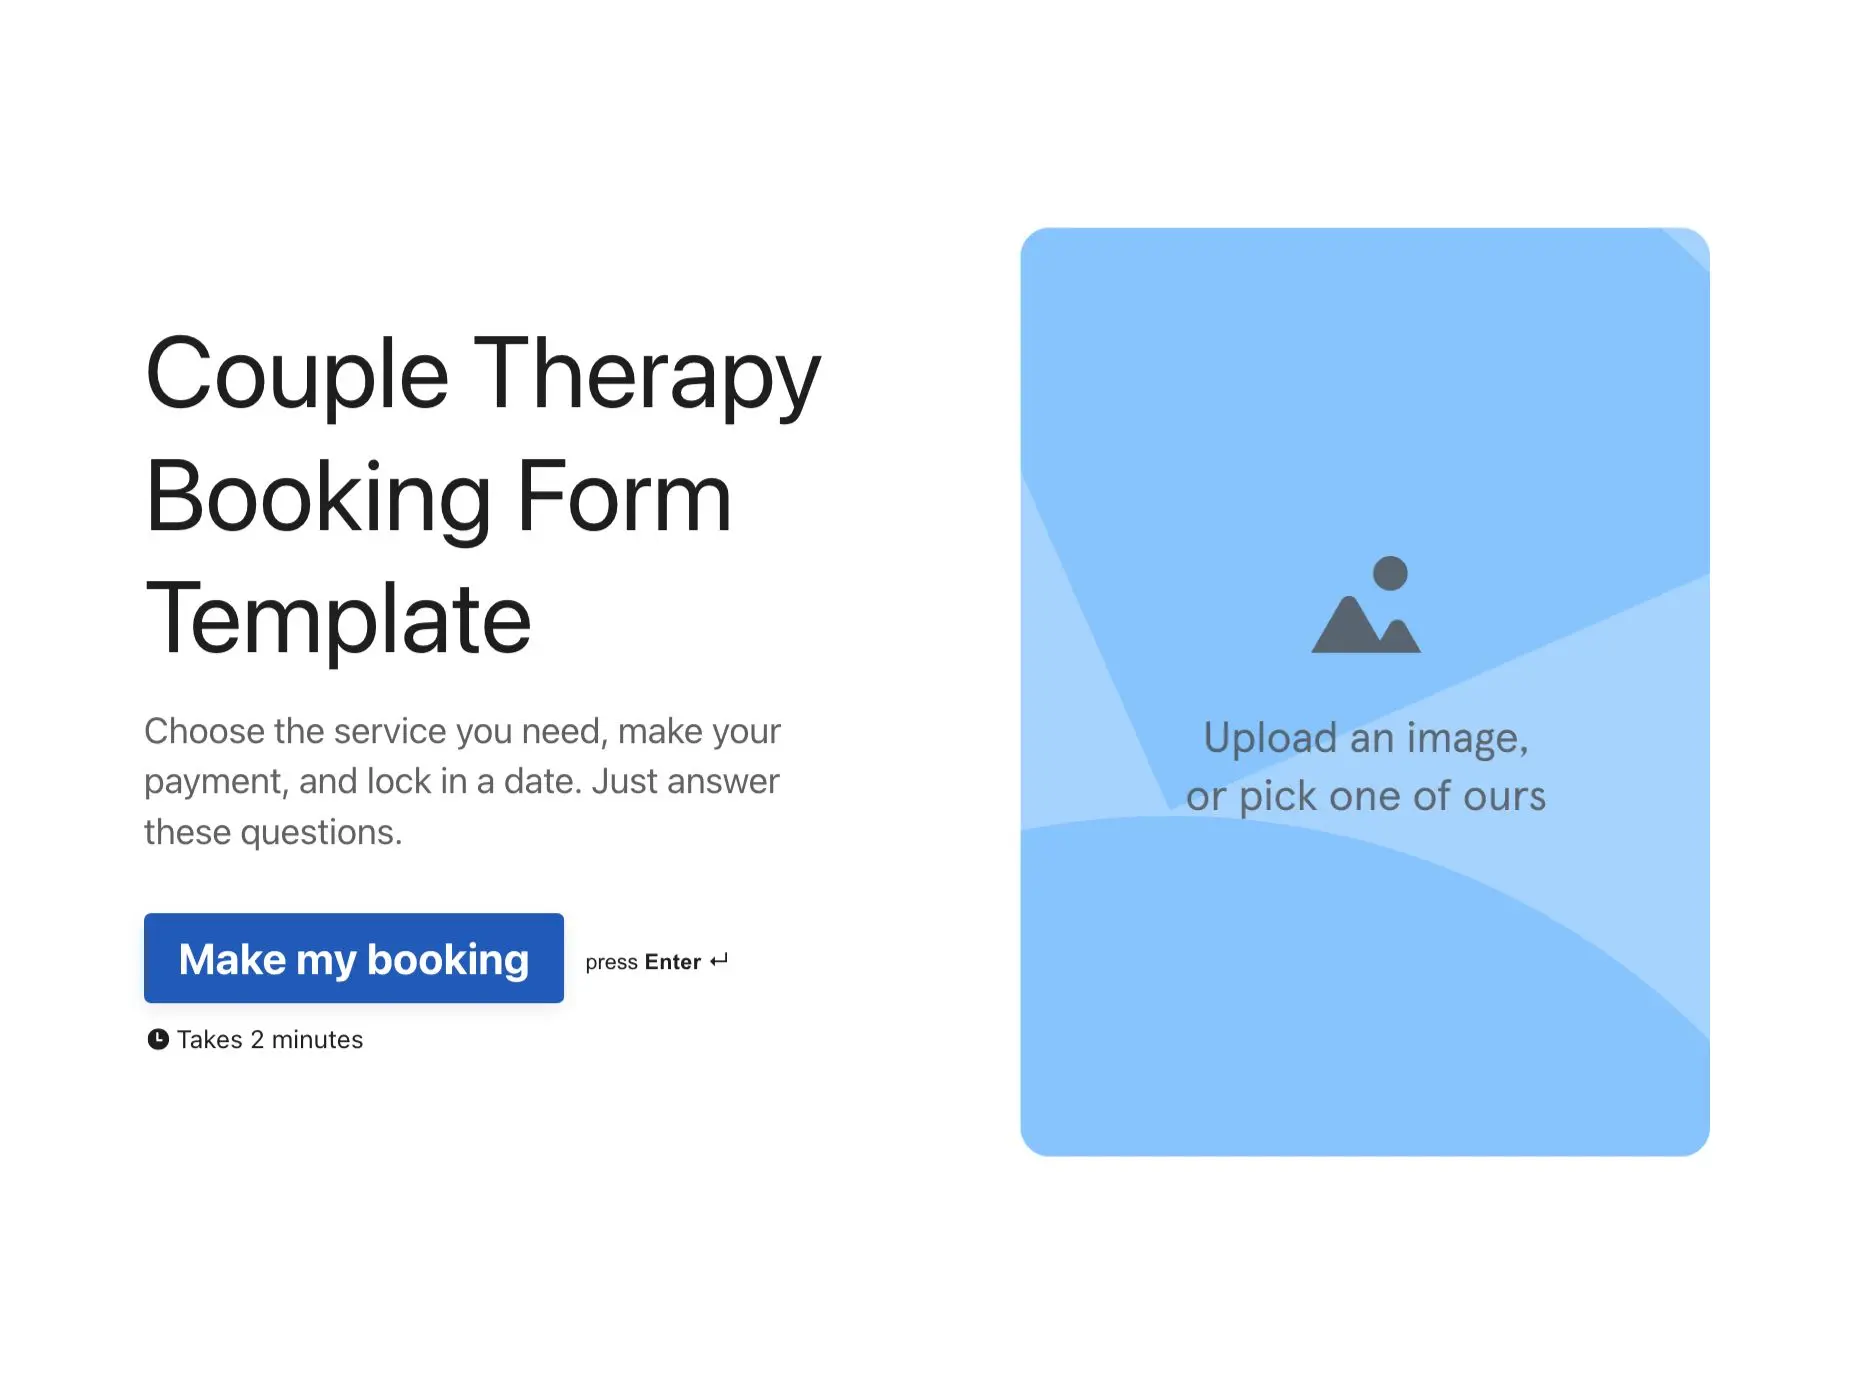 Couple Therapy Booking Form Template Hero